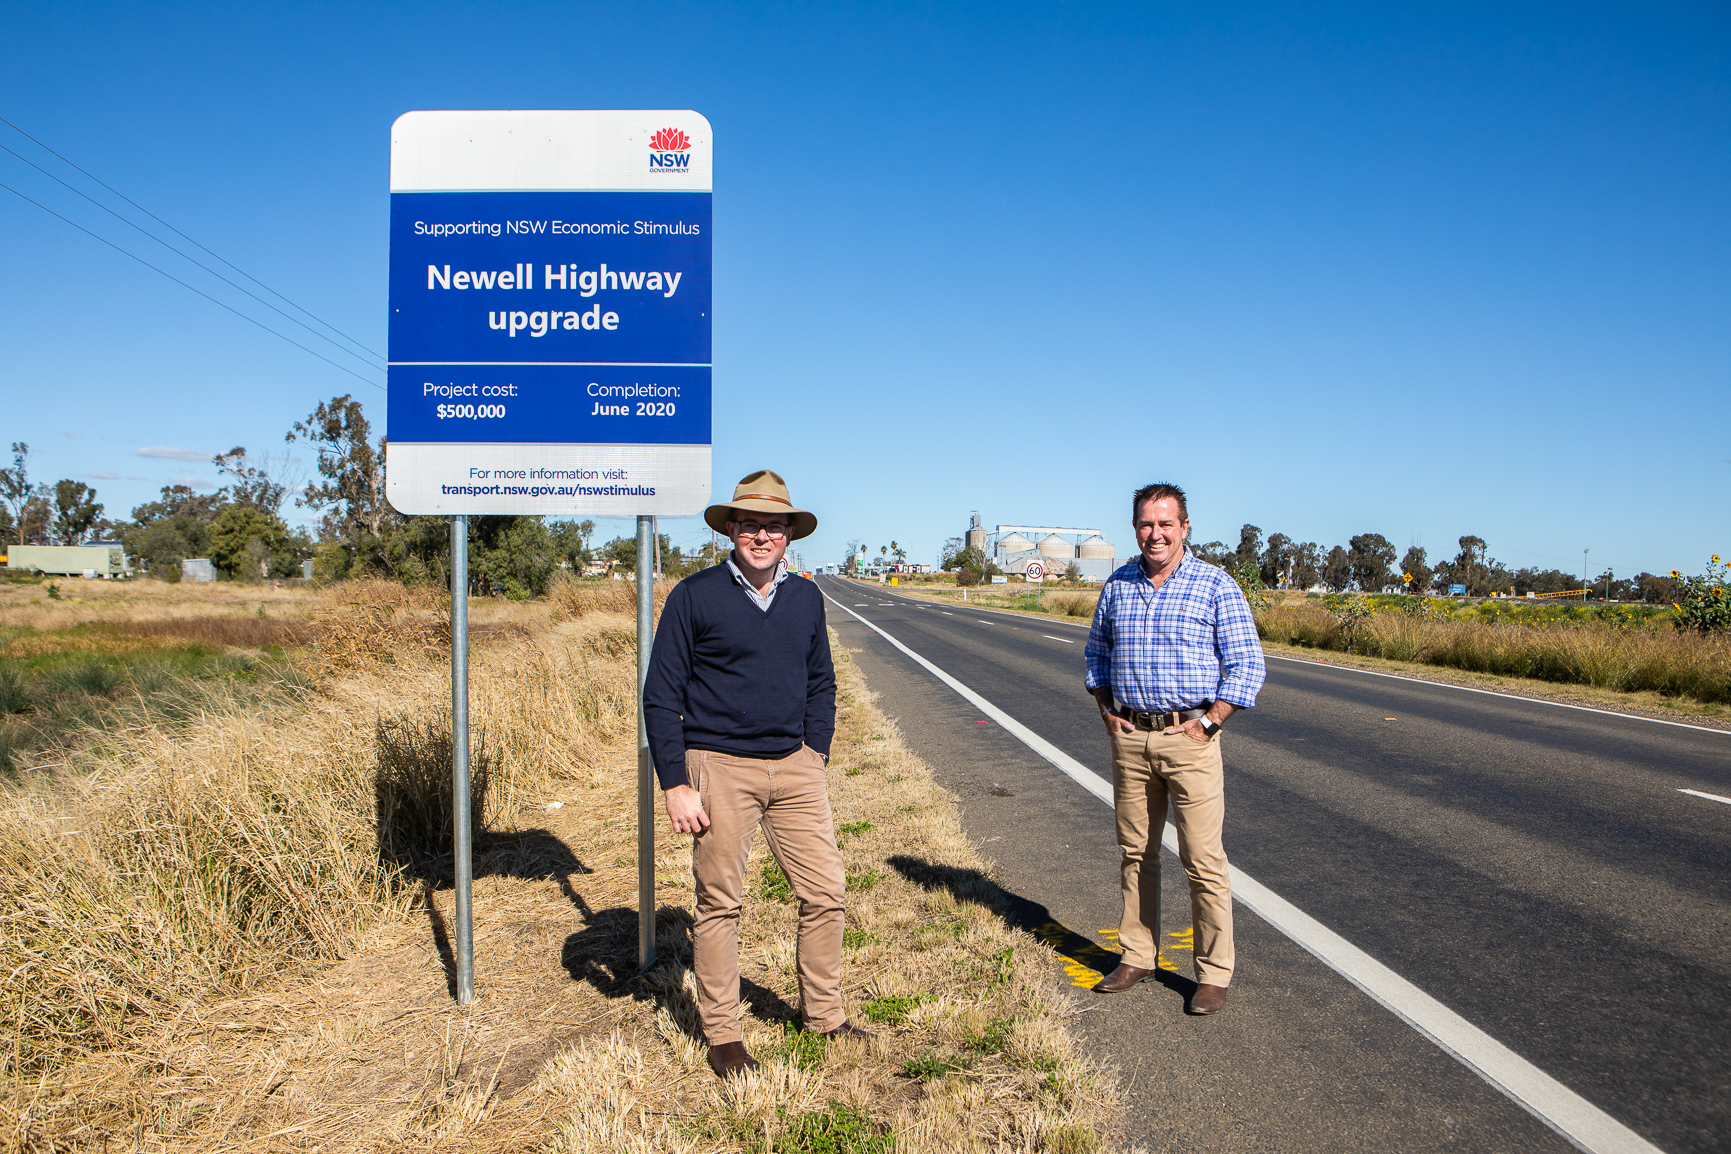 Upgrade for the Newell Highway